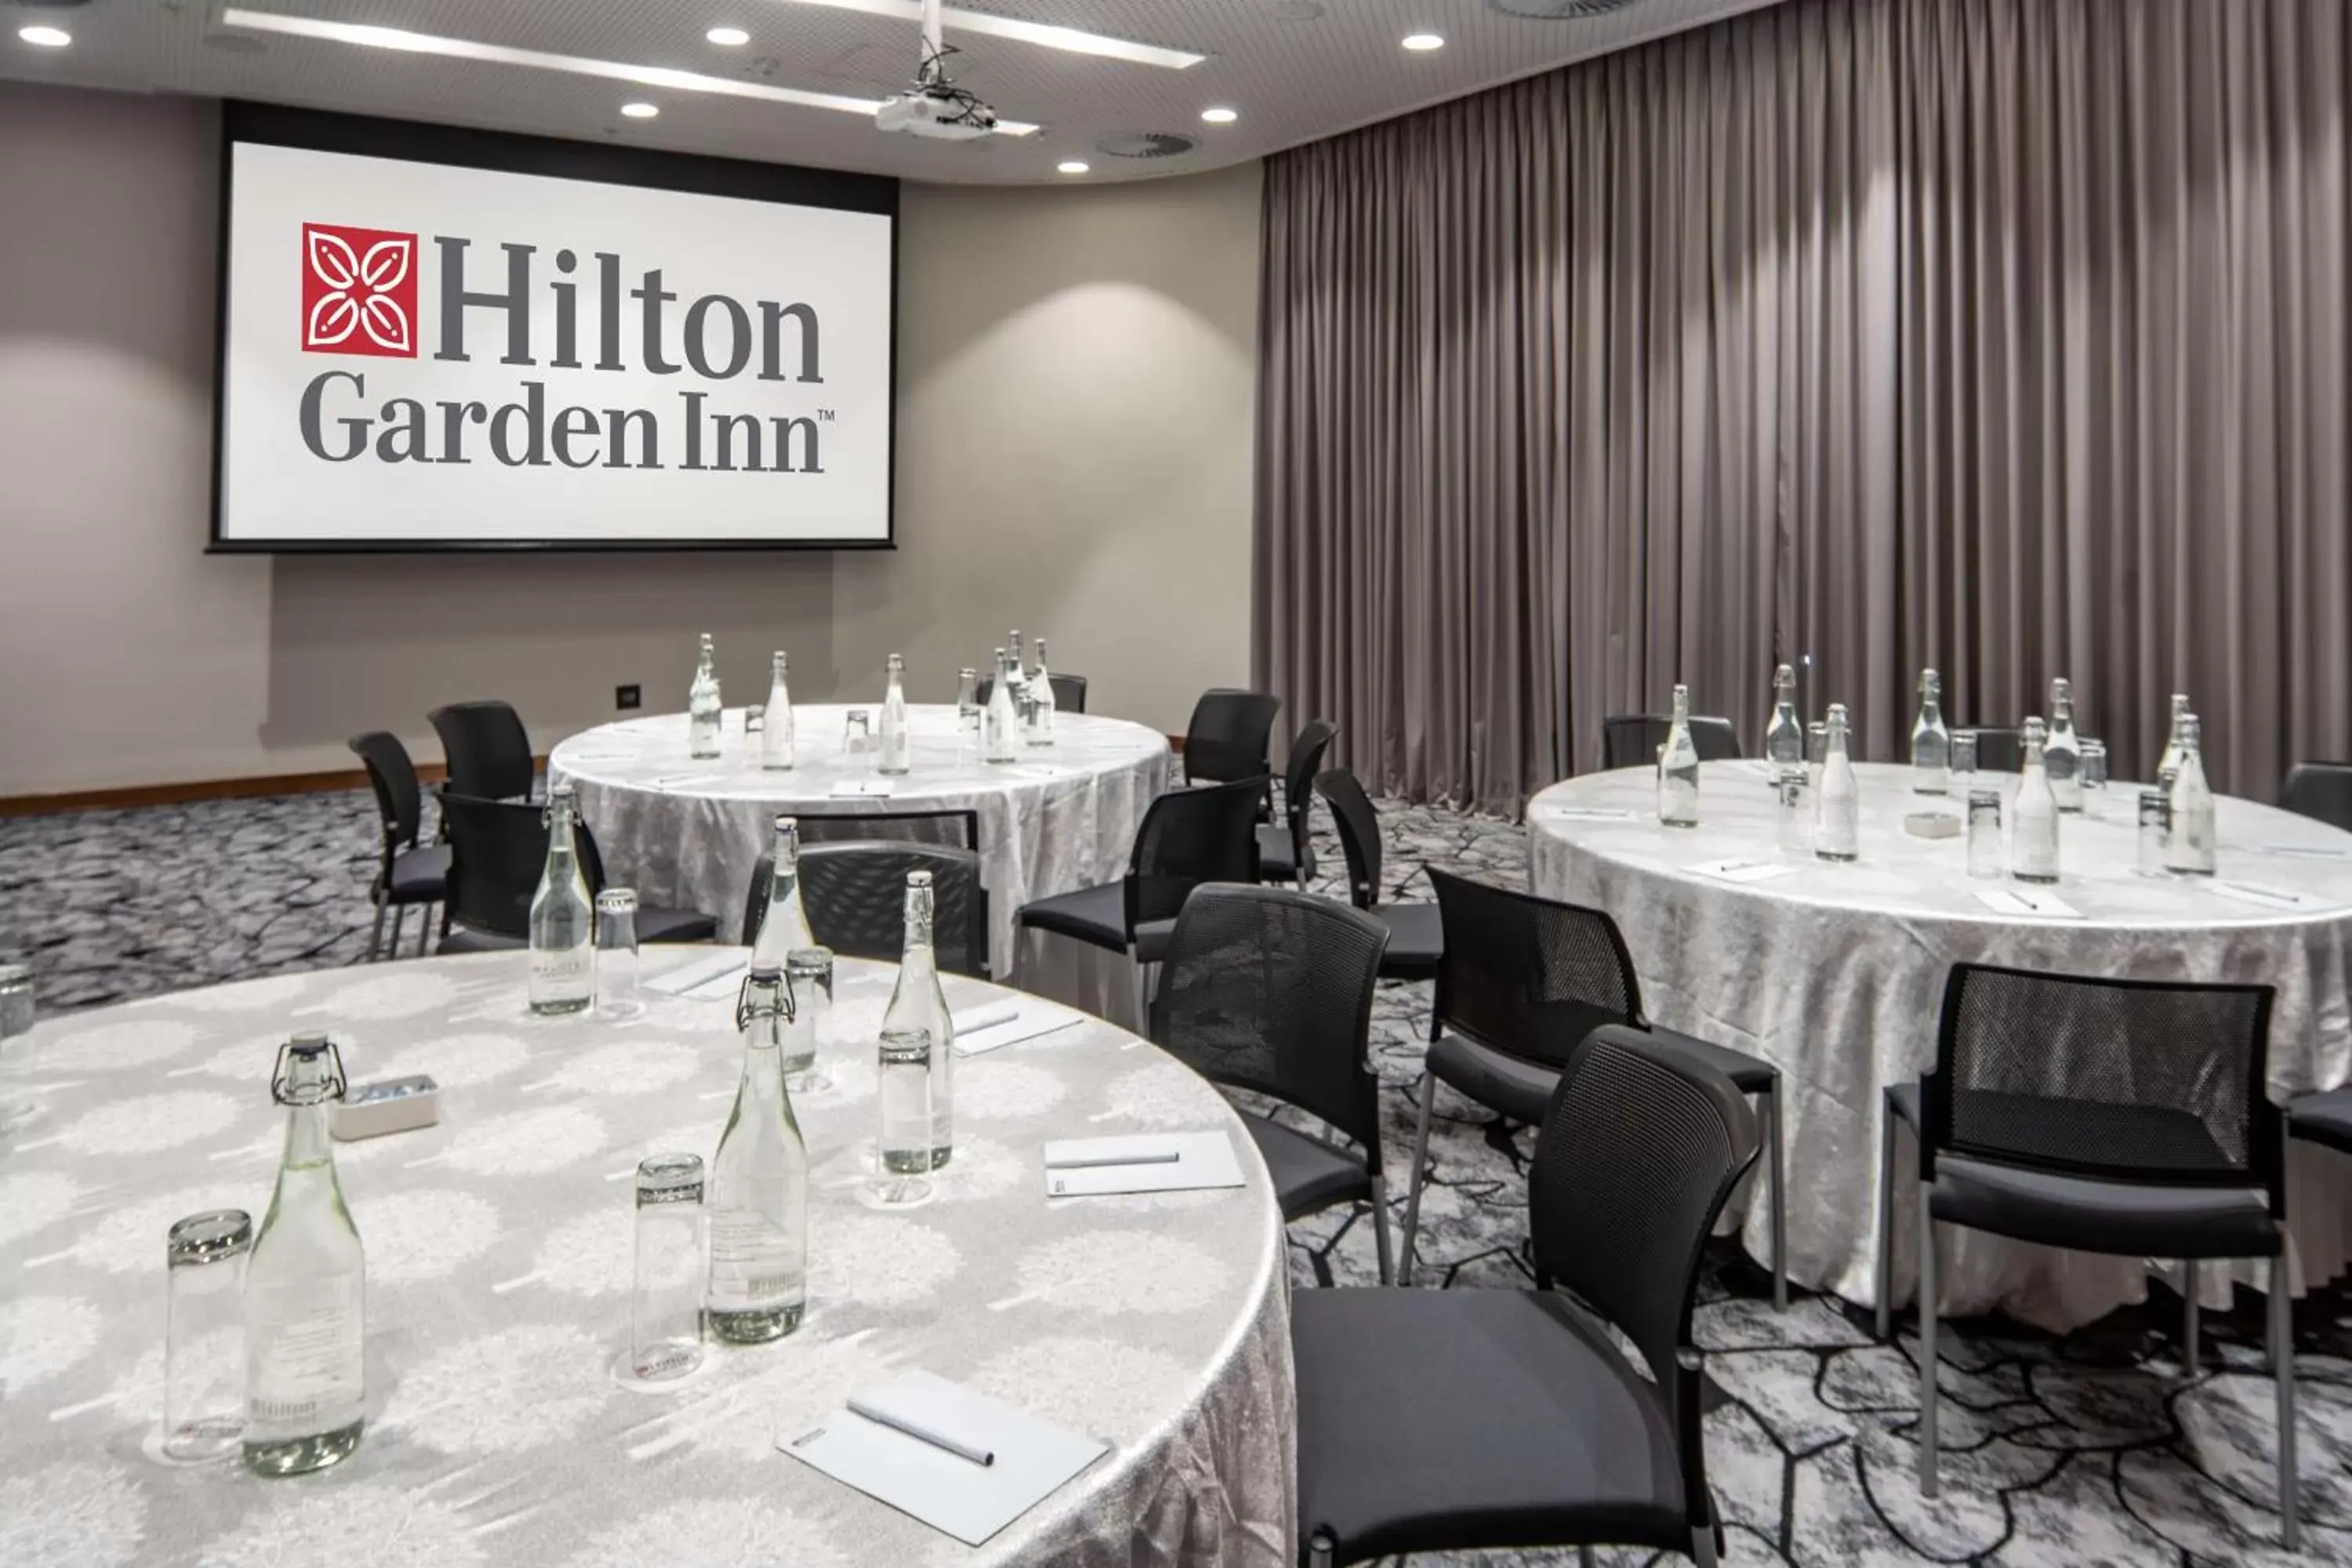 Meeting/conference room, Banquet Facilities in Hilton Garden Inn Mbabane